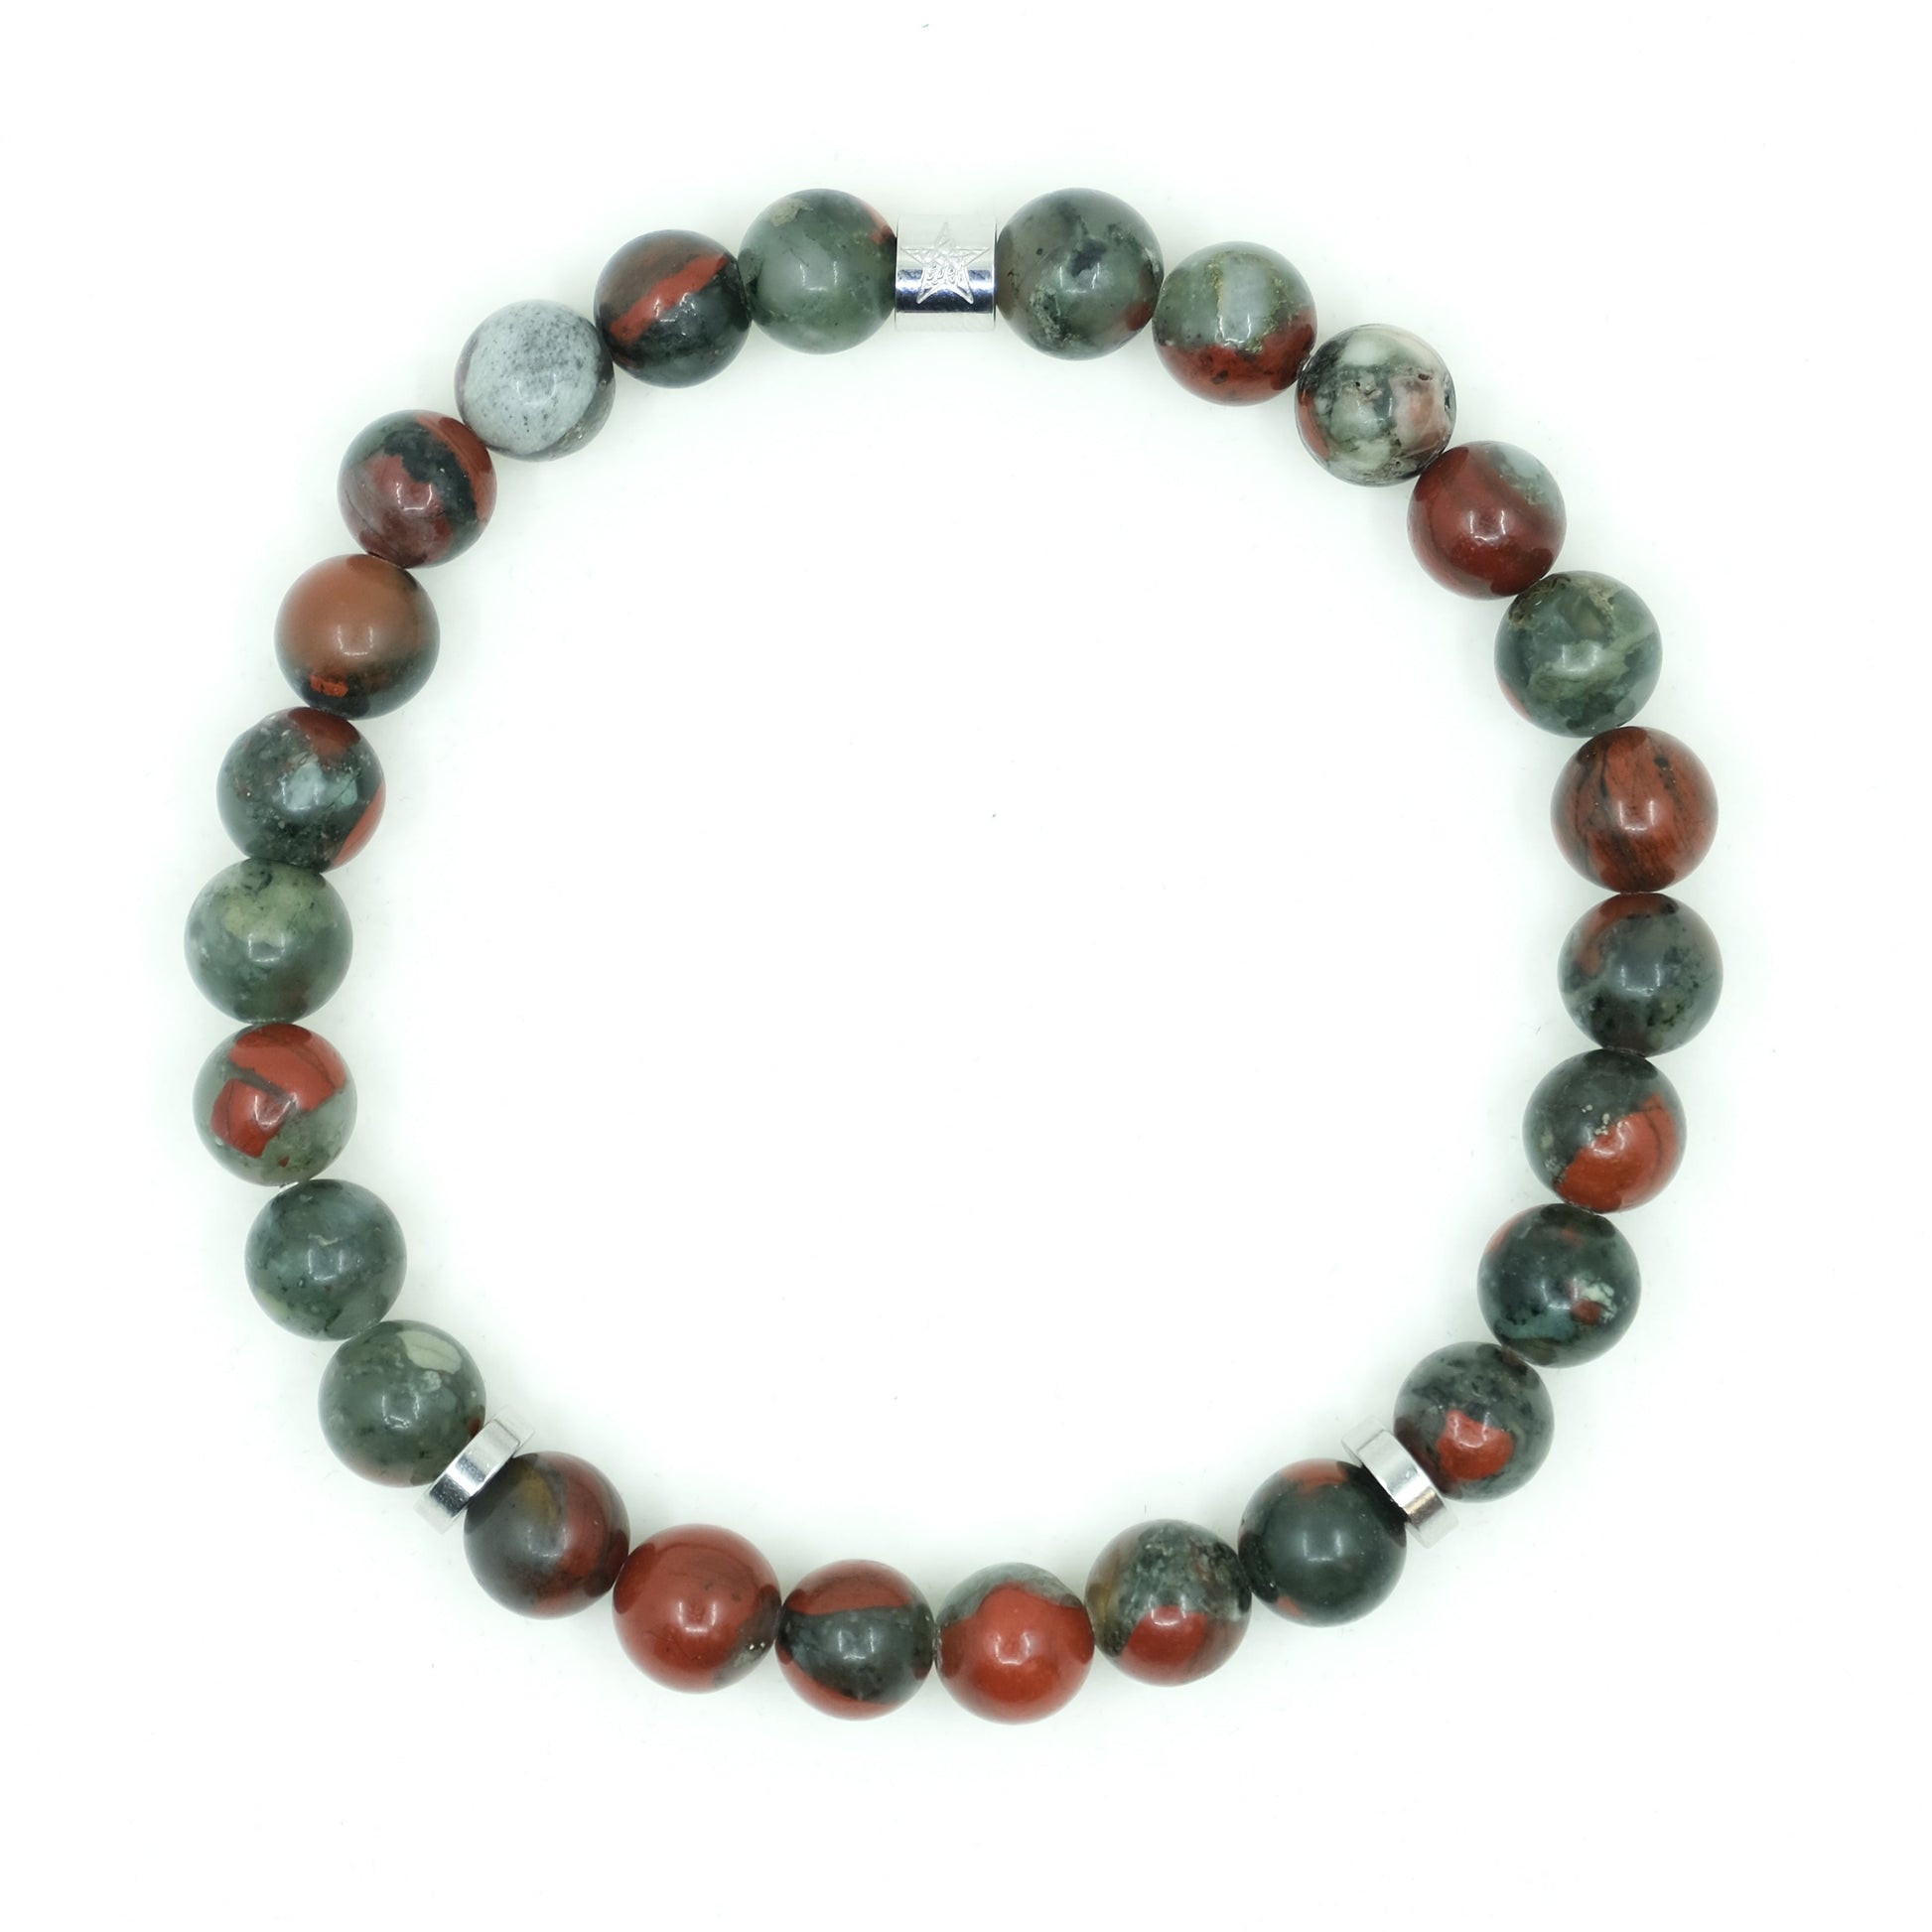 Bloodstone bracelet with stainless steel accessories from above